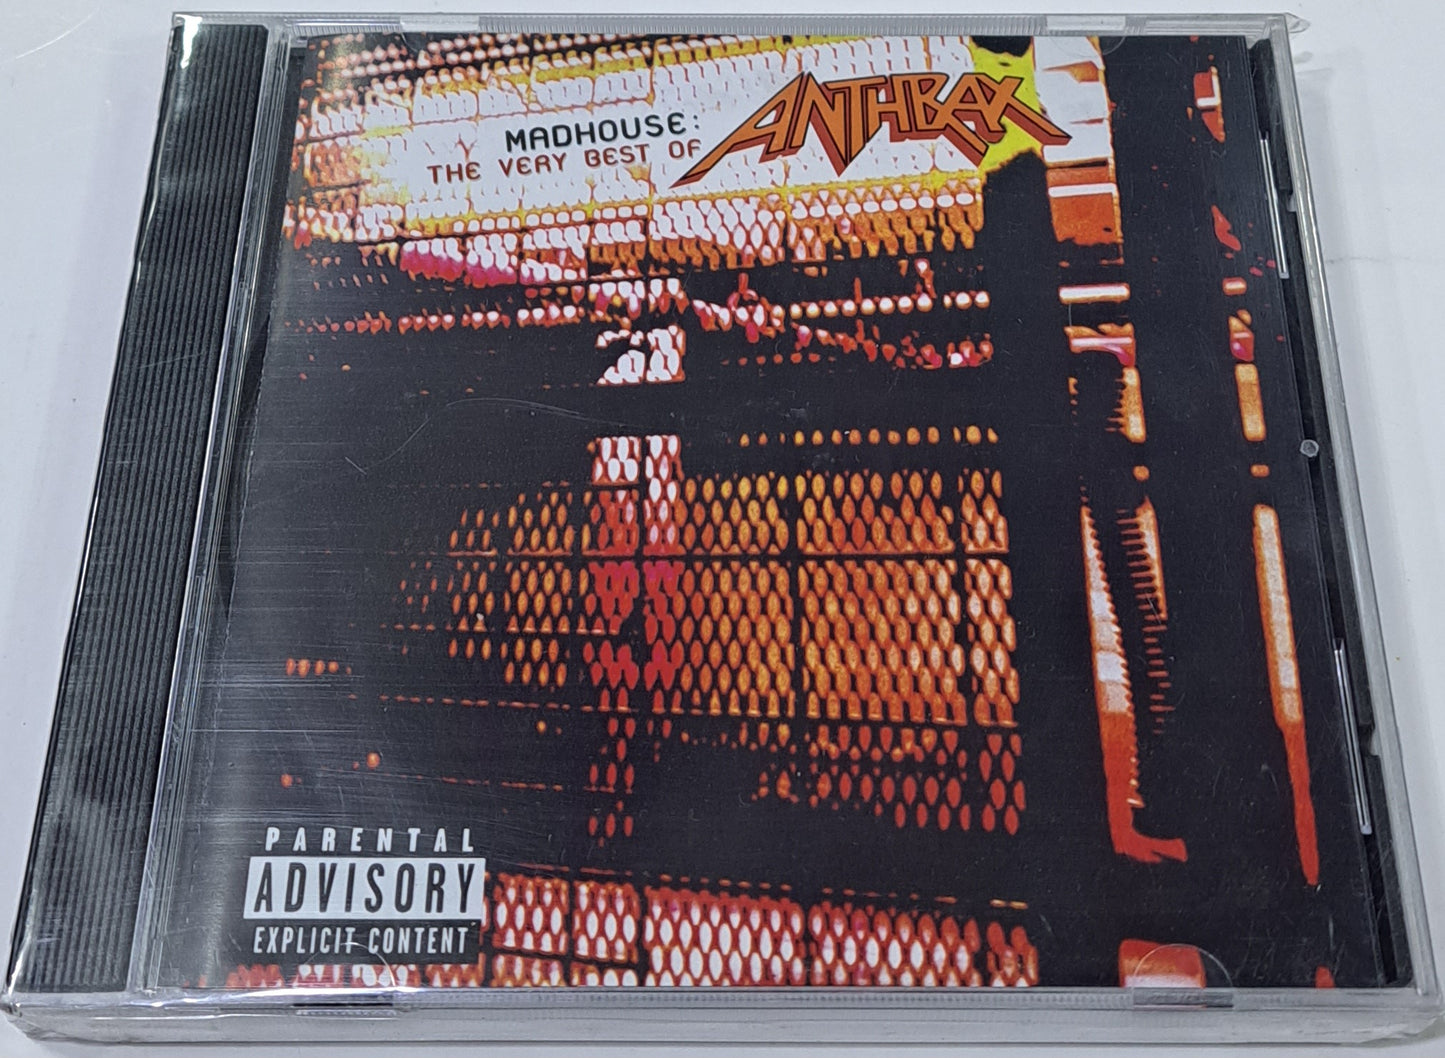 ANTHRAX - THE VERY BEST OF  CD